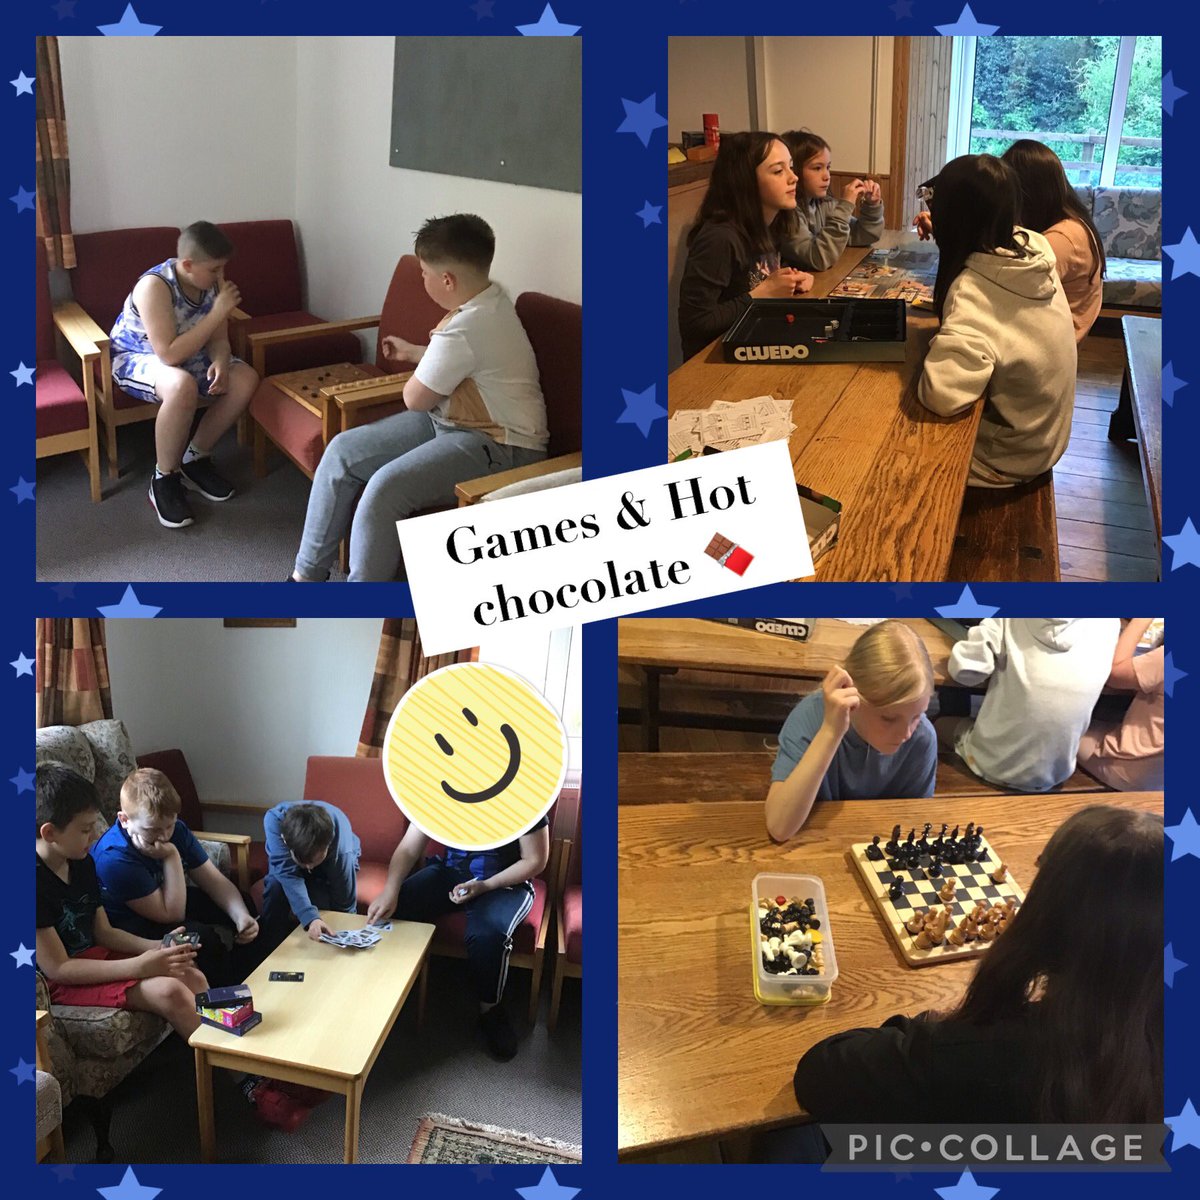 Team Humber are finishing their first day off with games and hot chocolate 🍫♟🎲